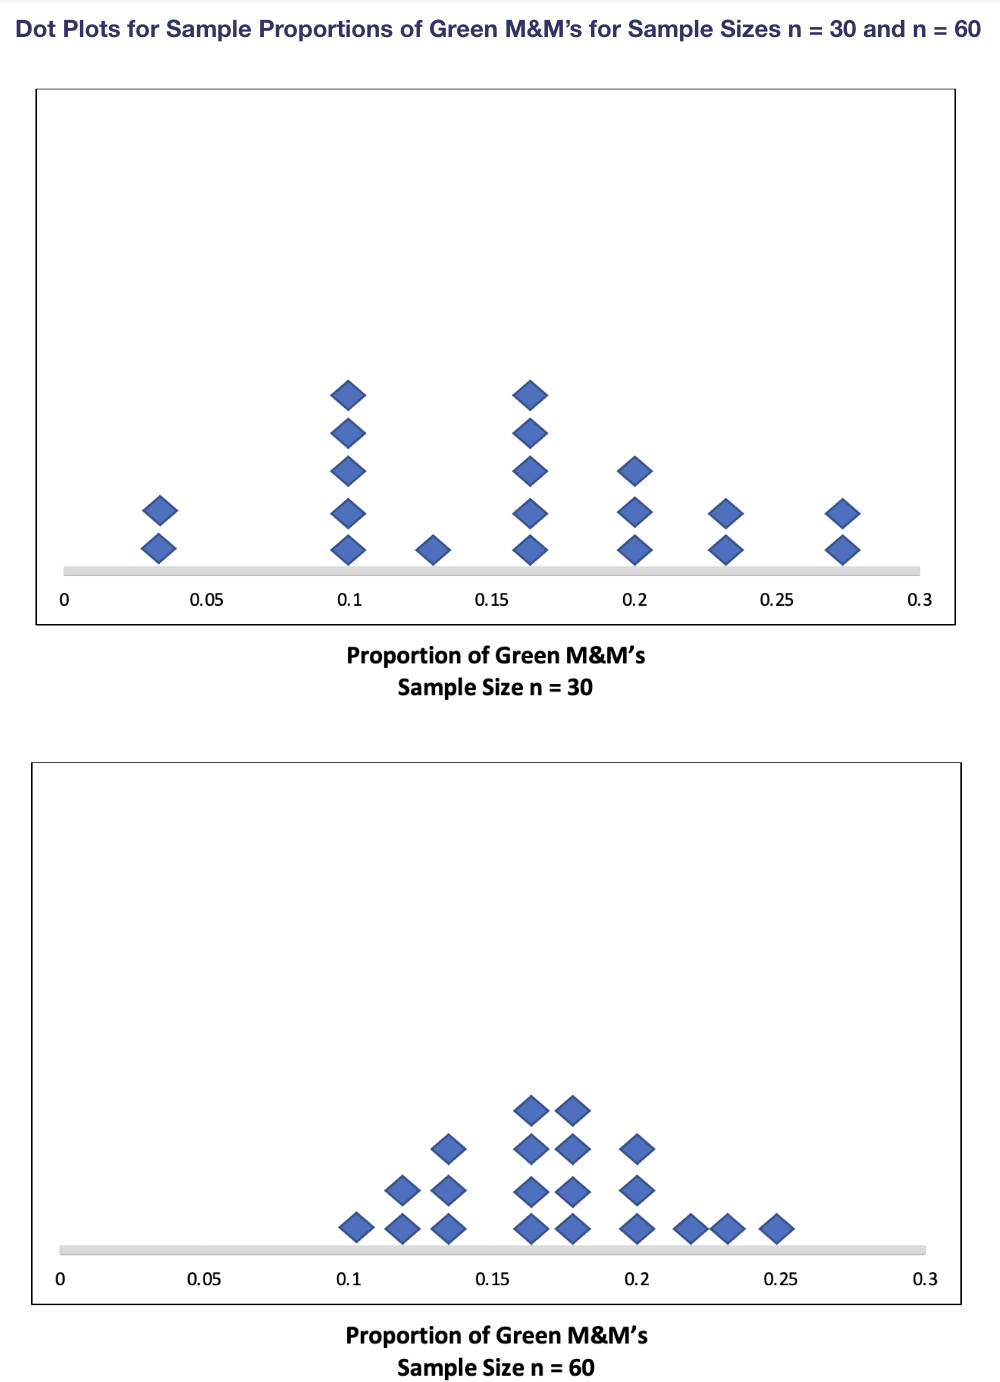 Dot Plots for Sample Proportions of Green M&M's for Sample Sizes n = 30 and n = 60
0
0.05
0.05
0.1
0.15
0.1
Proportion of Green M&M's
Sample Size n = 30
0.2
0.15
0.2
Proportion of Green M&M's
Sample Size n = 60
0.25
0.25
0.3
0.3